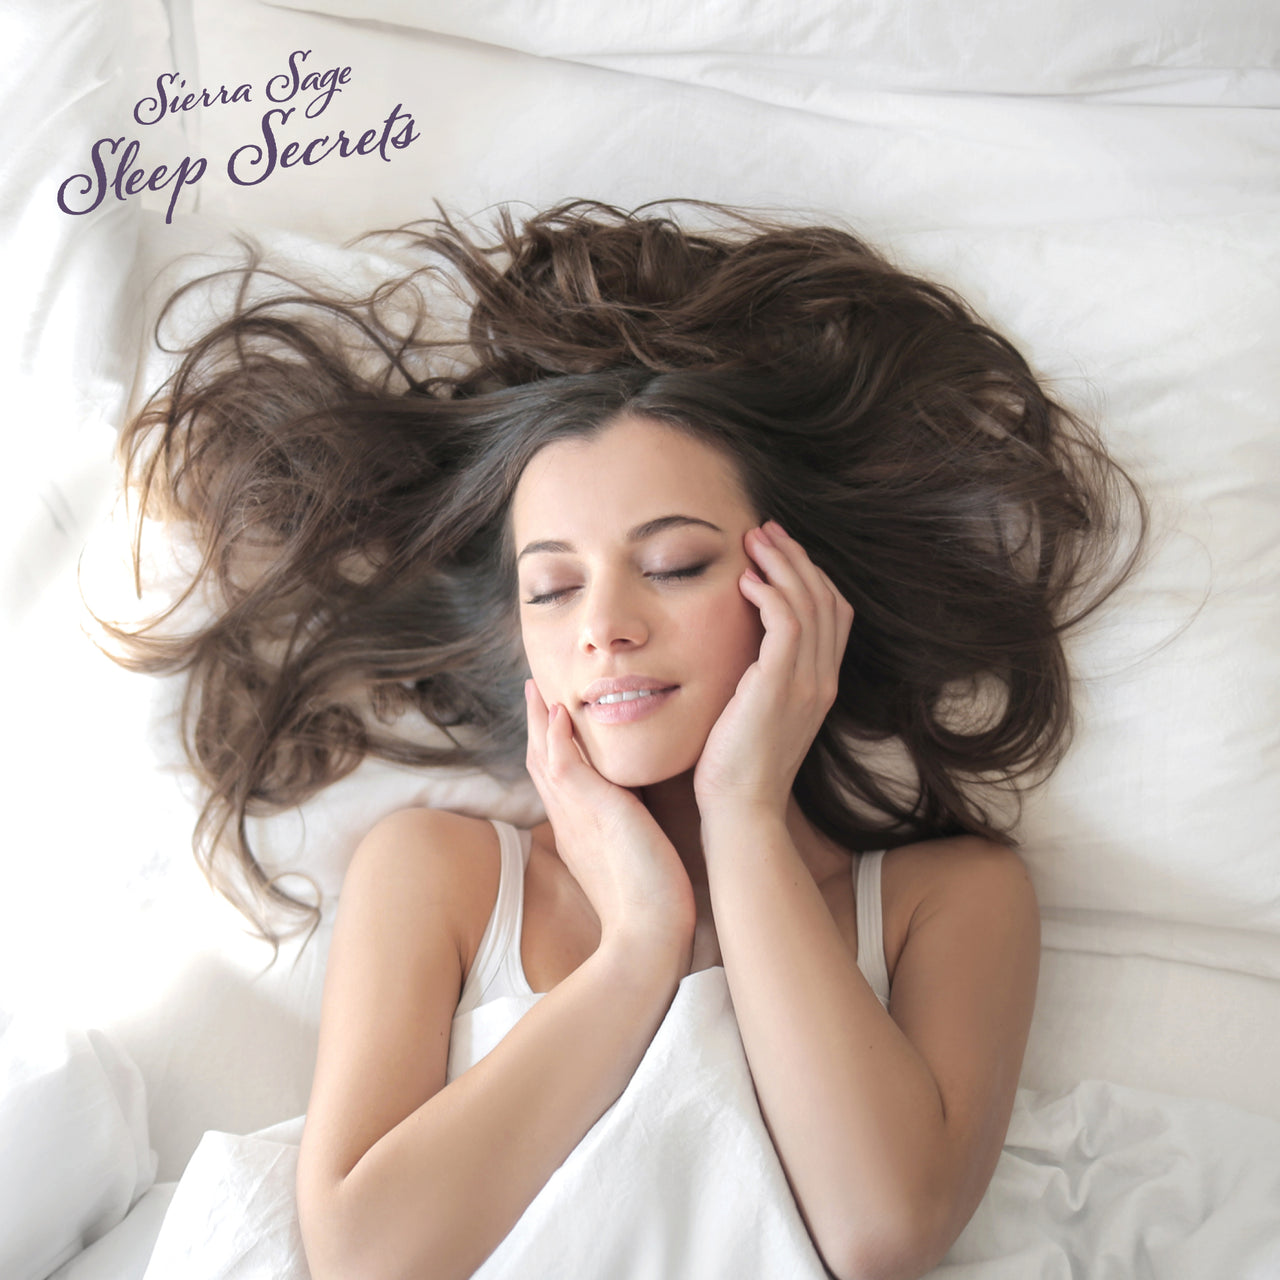 At-peace woman in bed pictured. Sierra Sage Sleep Secrets.